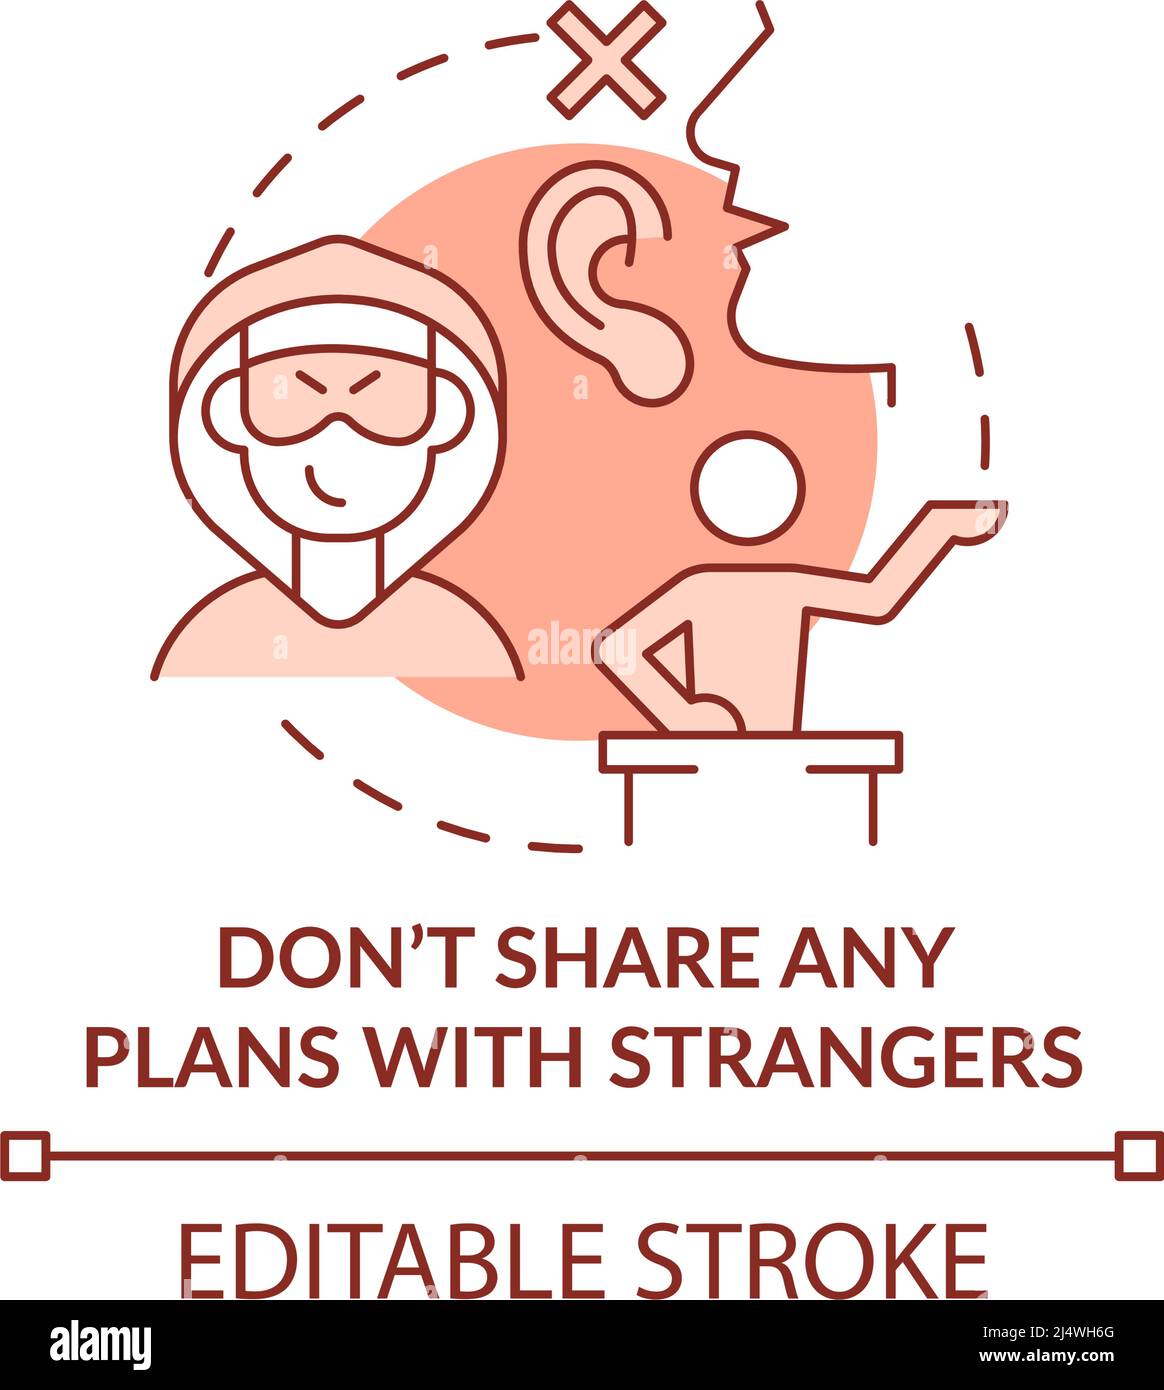 Dont share any plans with strangers terracotta concept icon Stock Vector